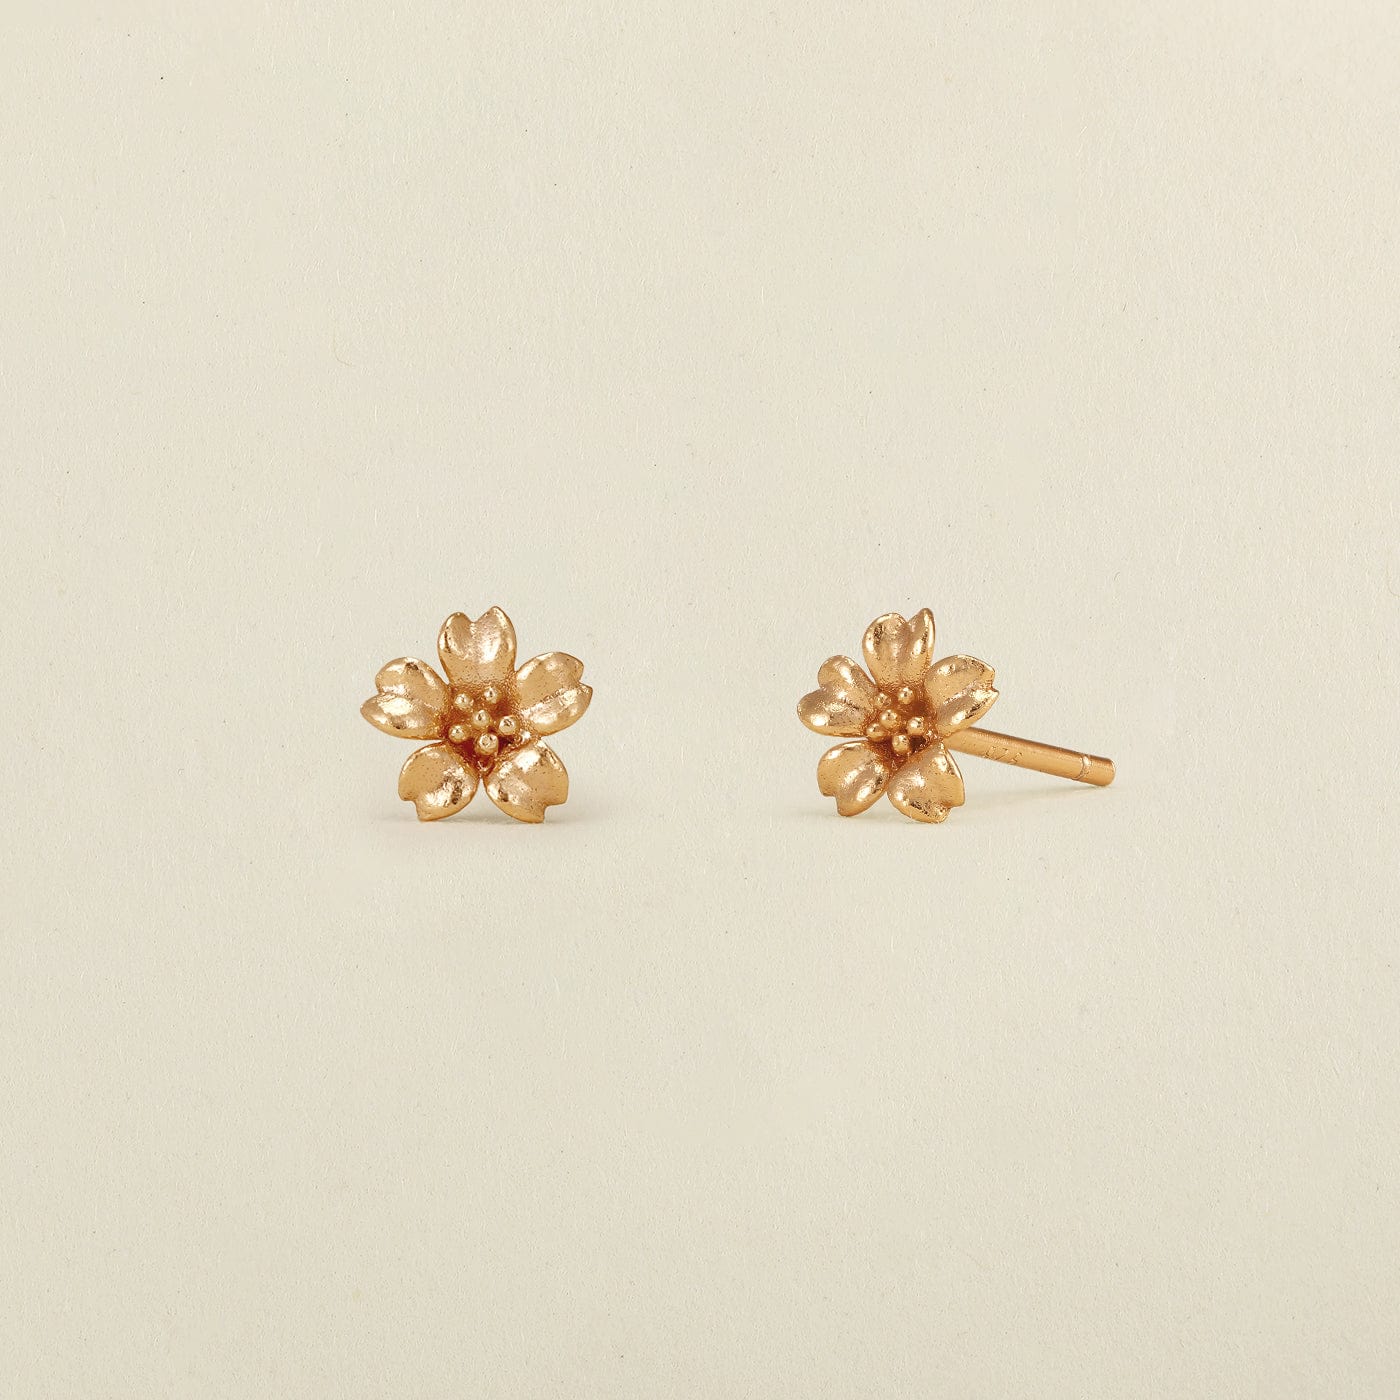 Birth Month Flower and blossom earrings